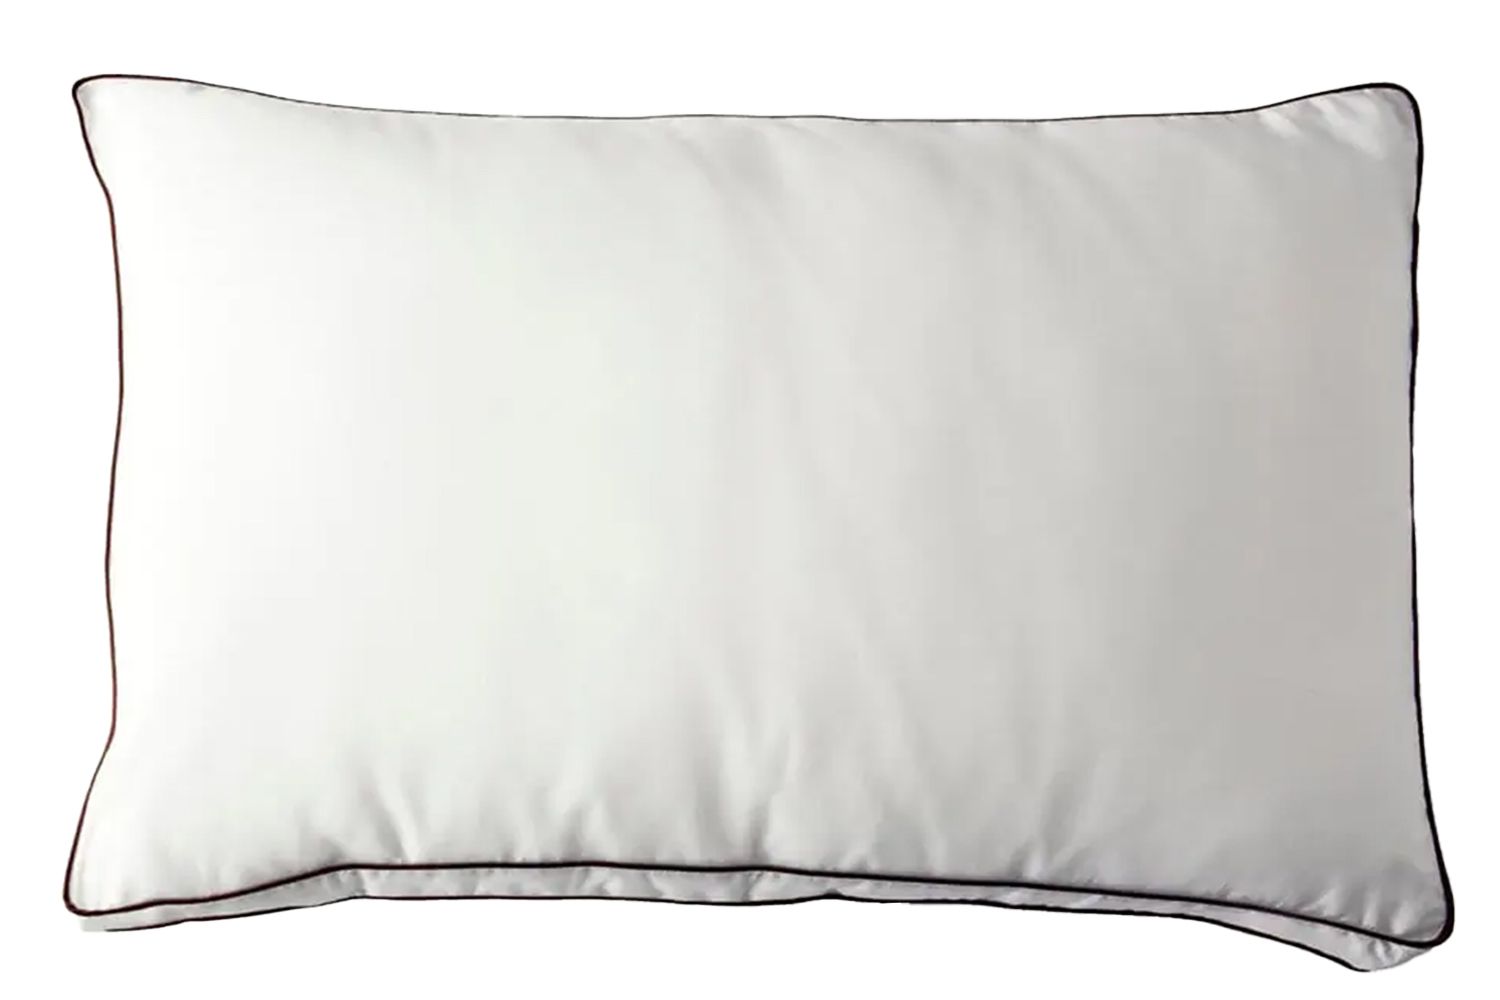 saatva latex pillow, one of the best pillows for side sleepers